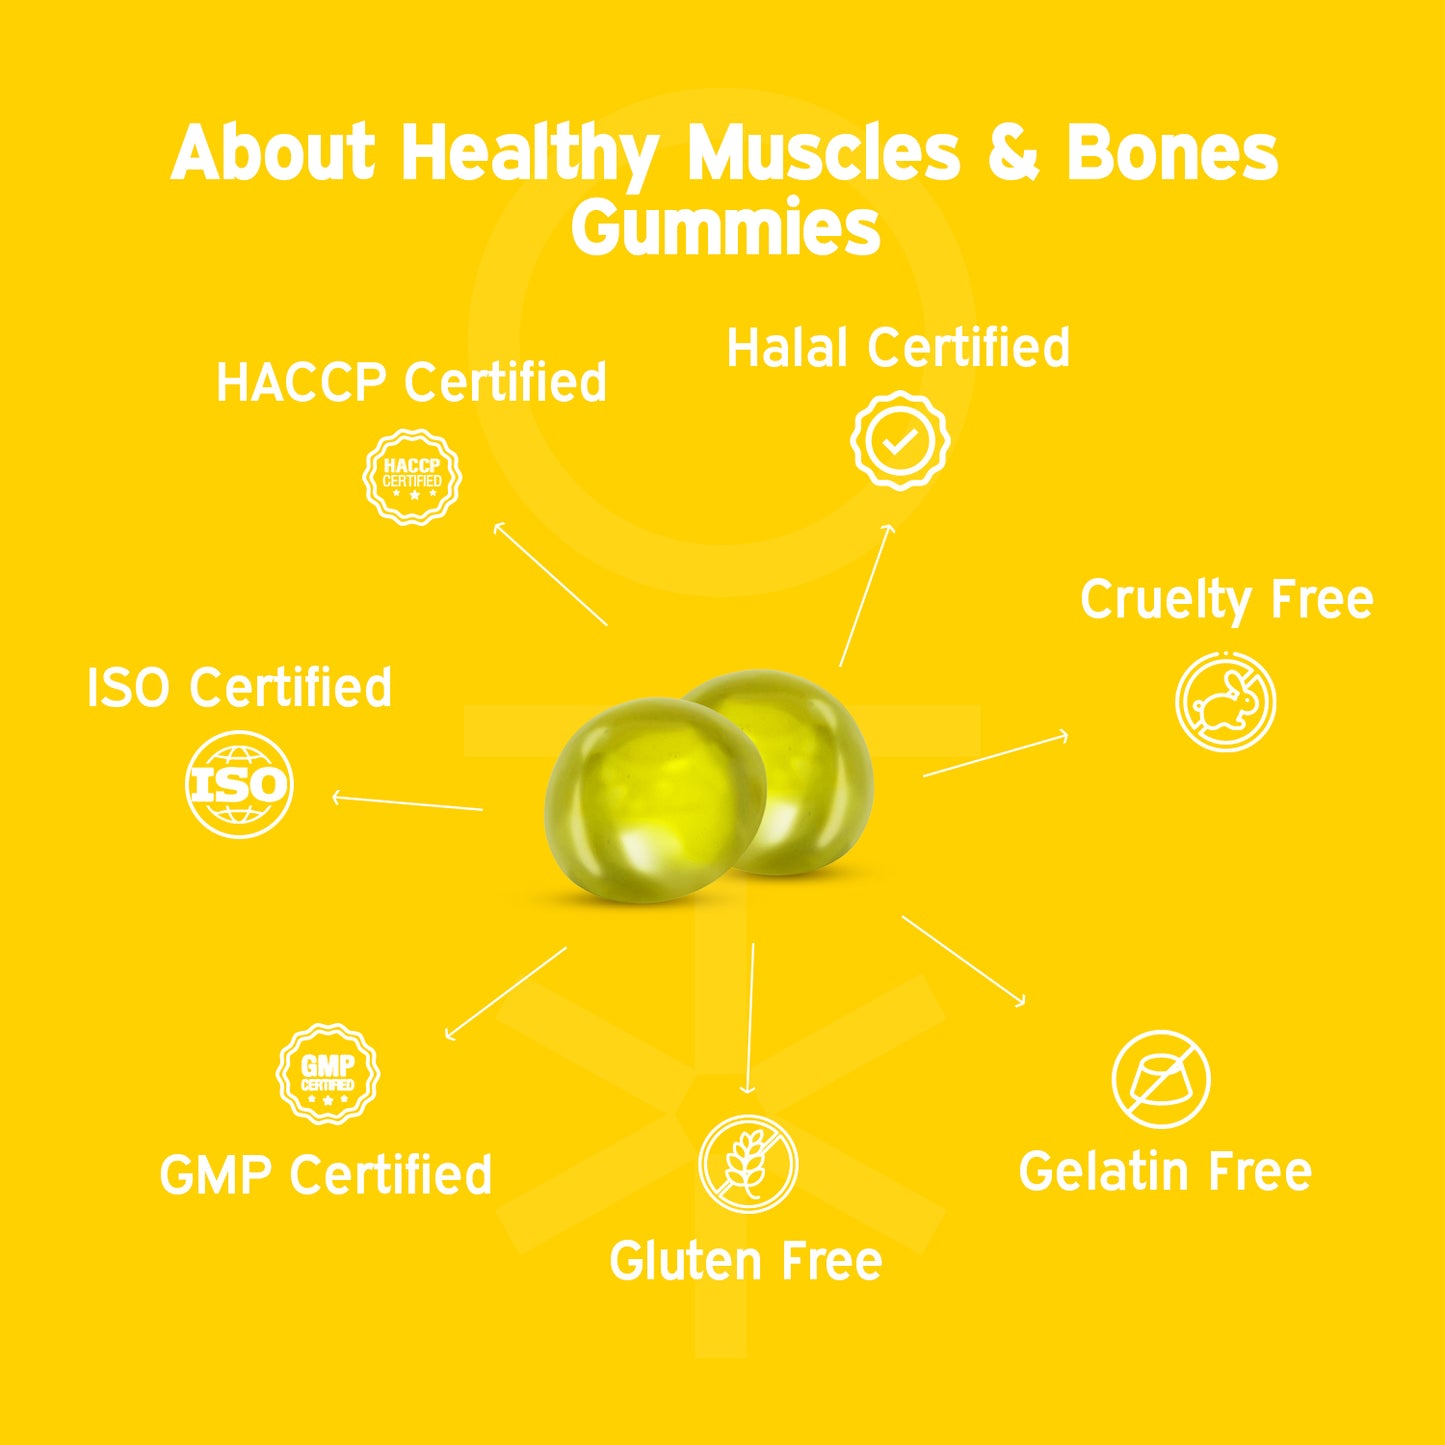 Healthy Muscles & Bones Gummies with Vitamin D2 & Calcium by Nutriburst India